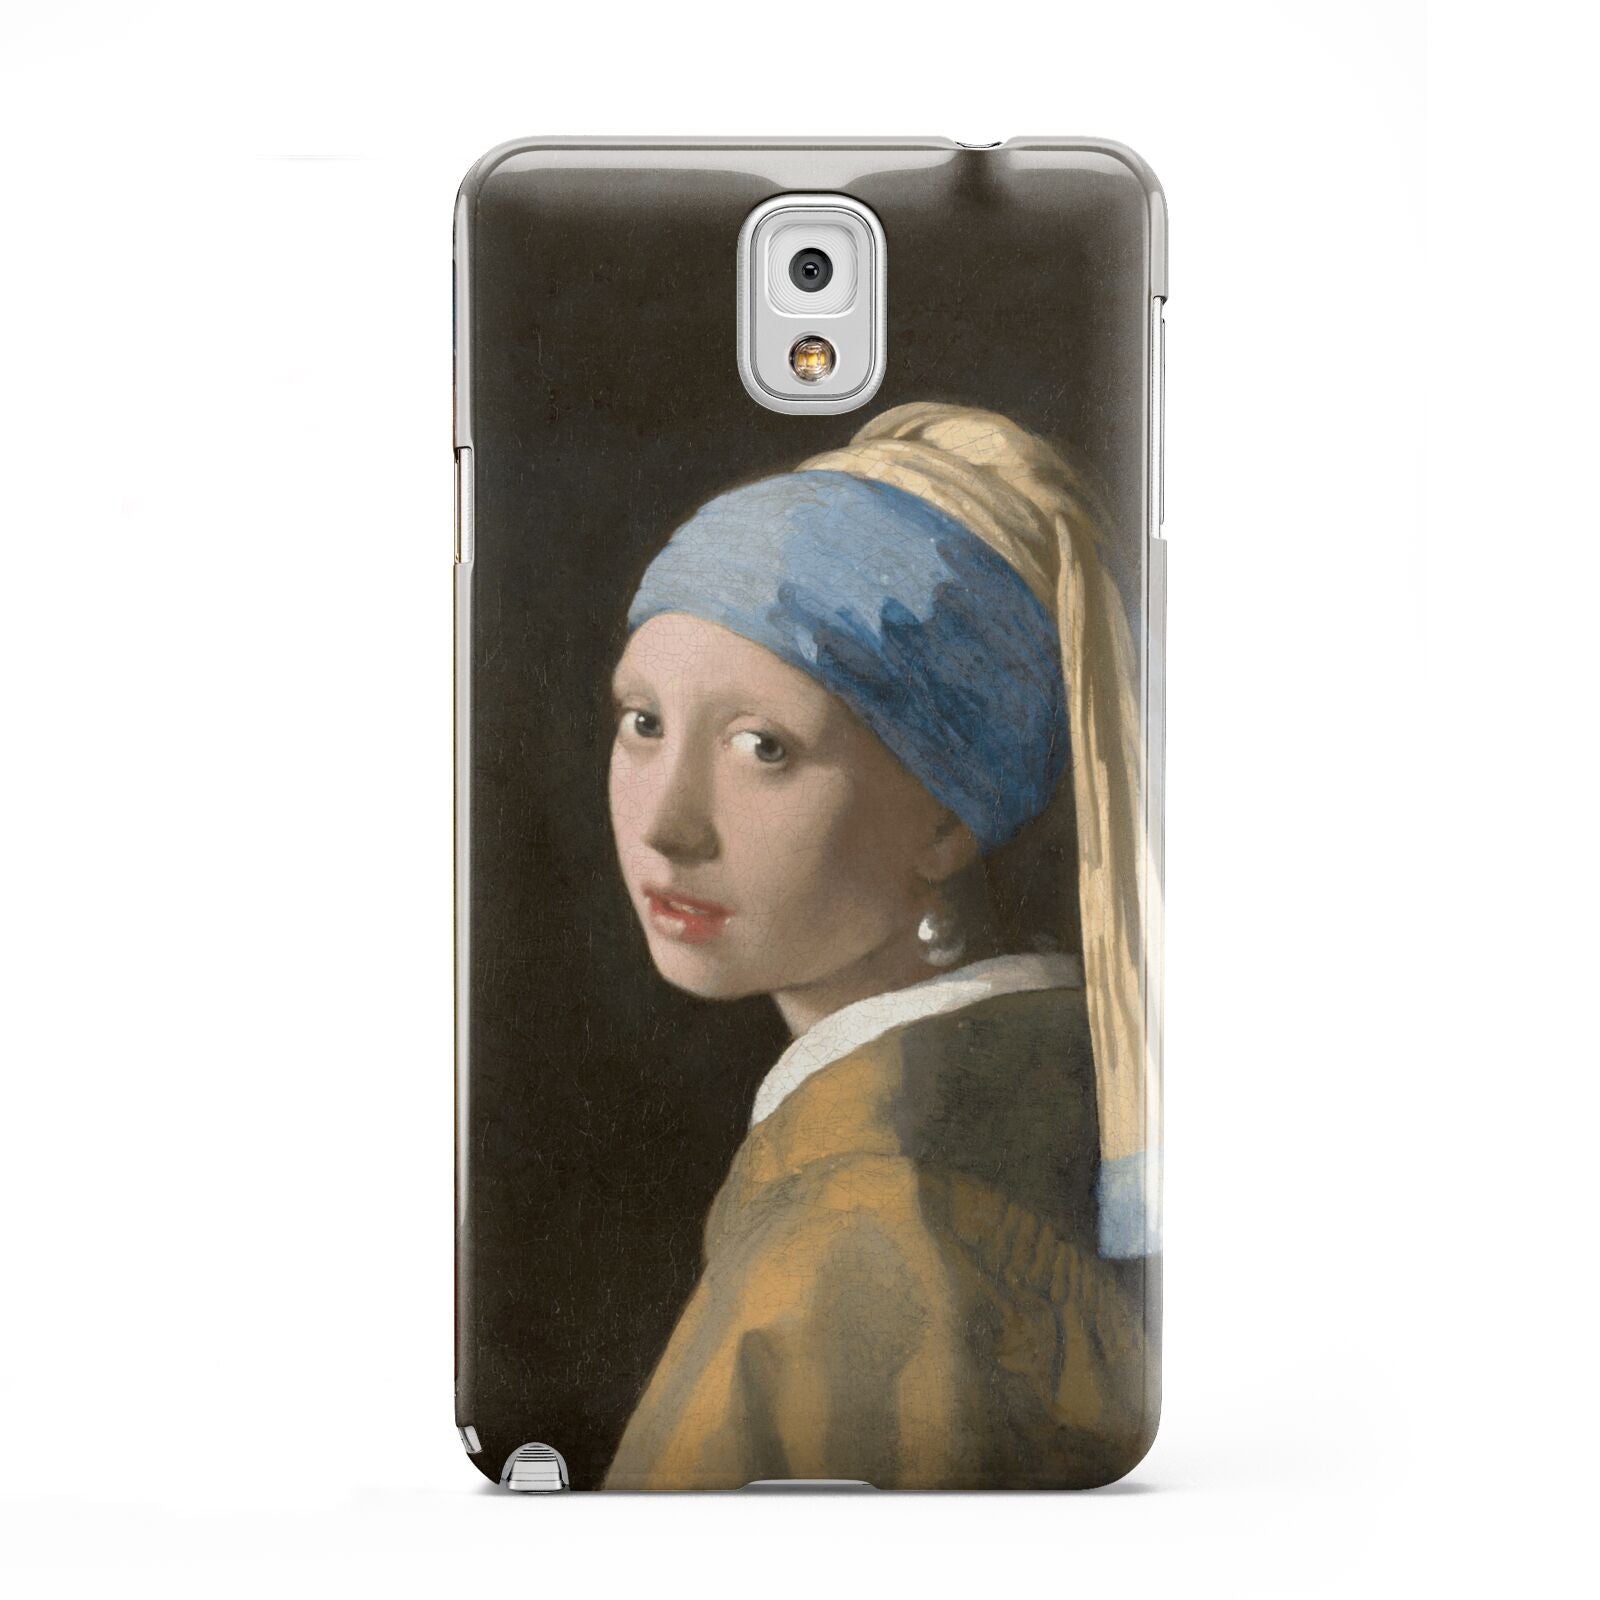 Girl With A Pearl Earring By Johannes Vermeer Samsung Galaxy Note 3 Case